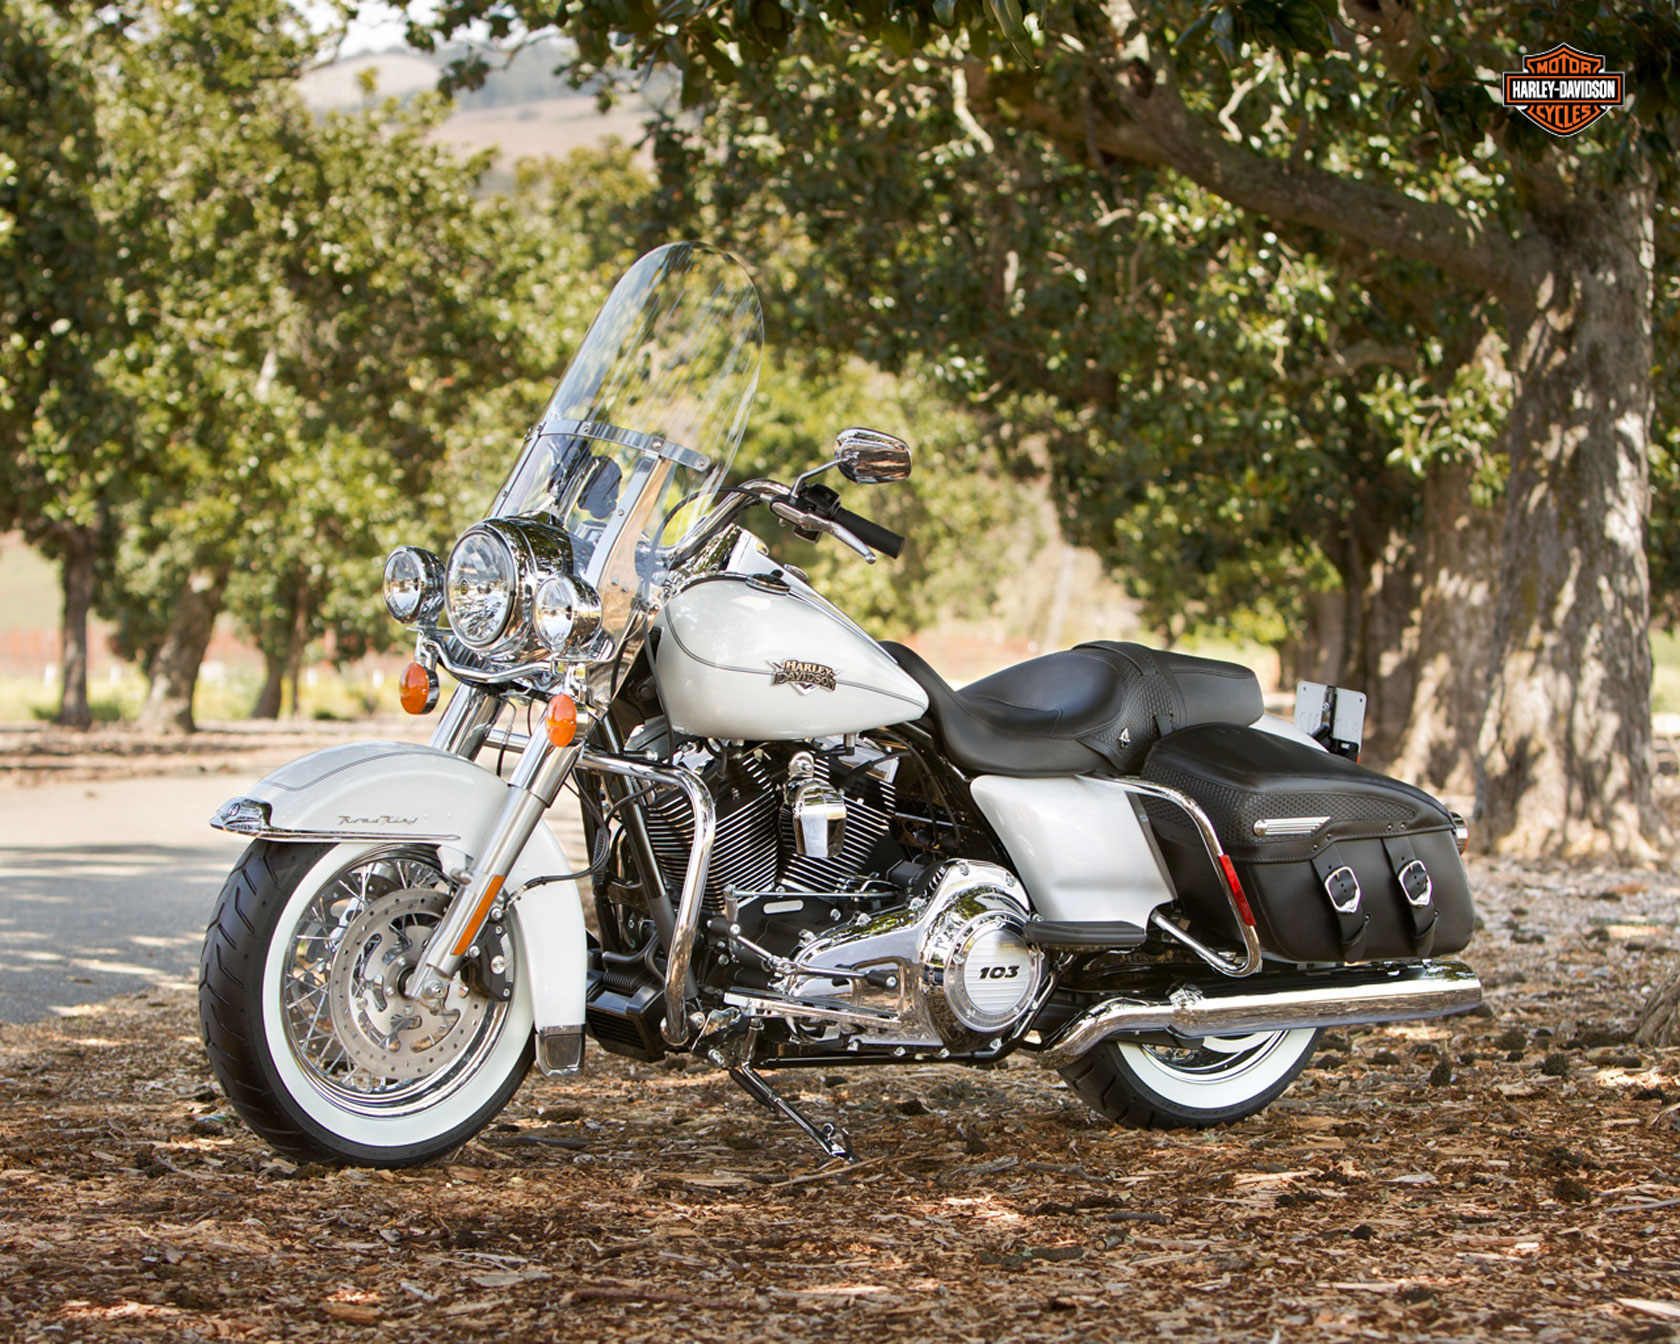 2013 Harley Davidson Flhrc Road King Classic Review